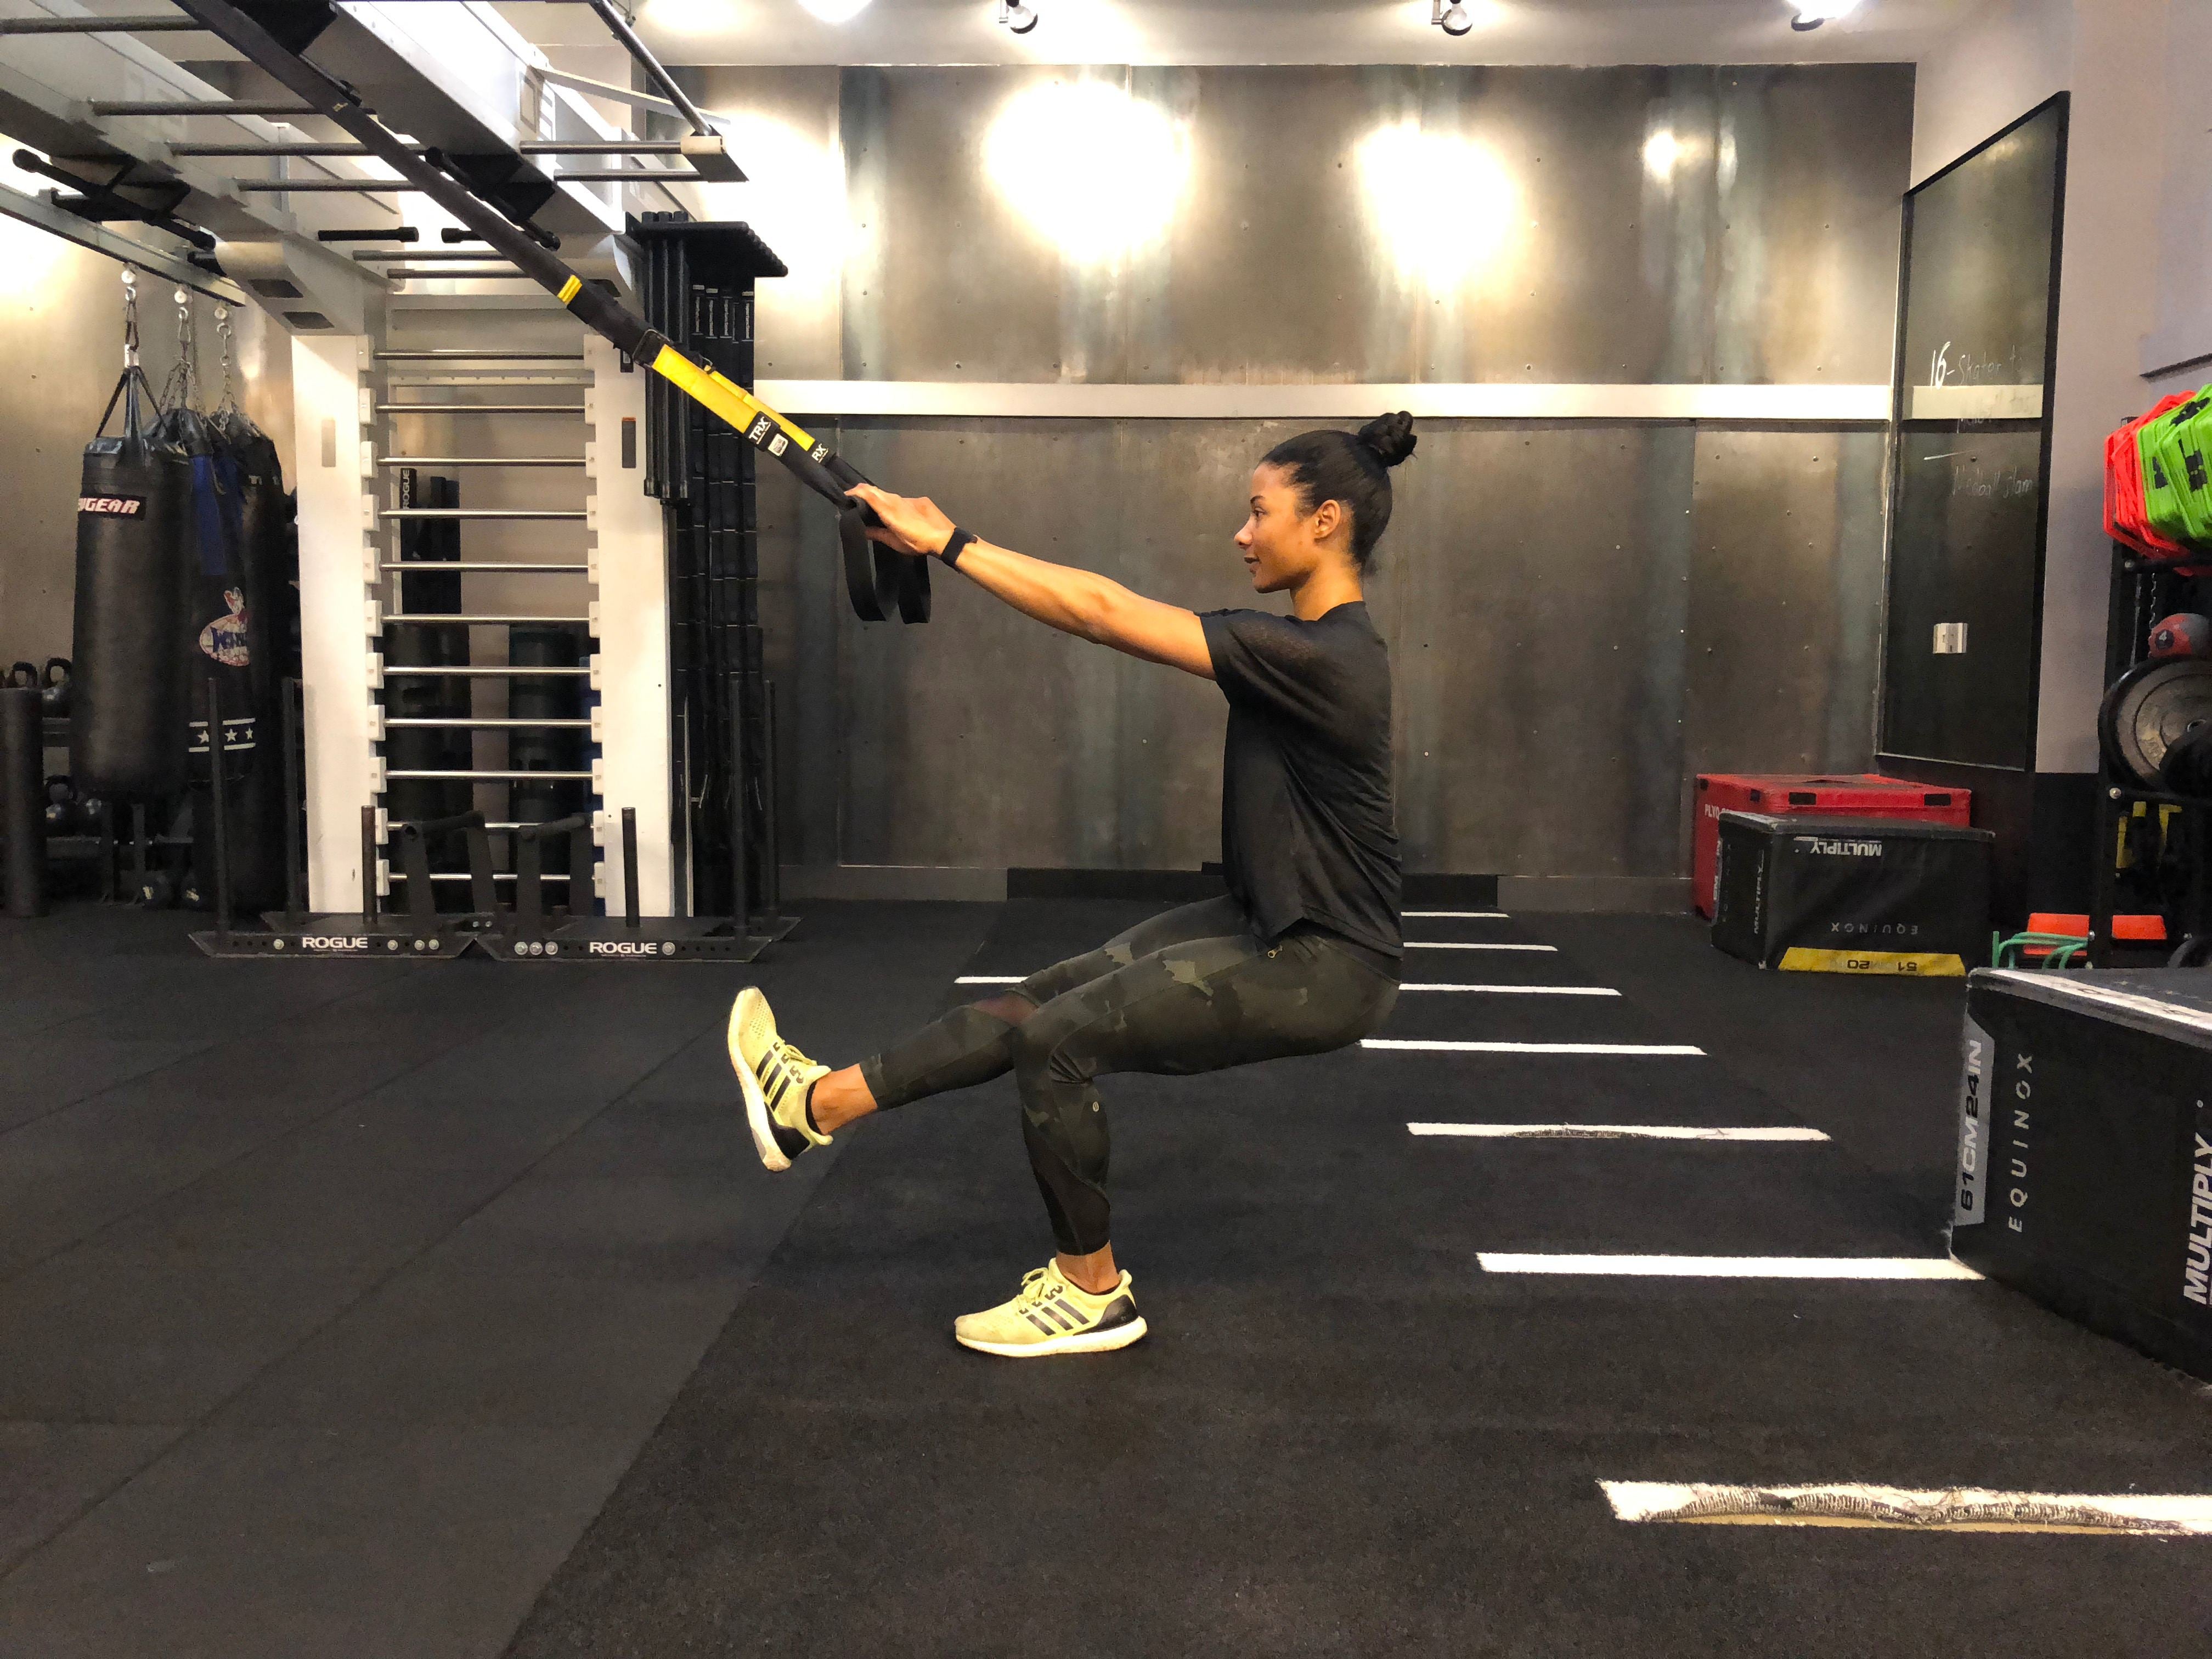 11 New Ways to Work Out with TRX Straps